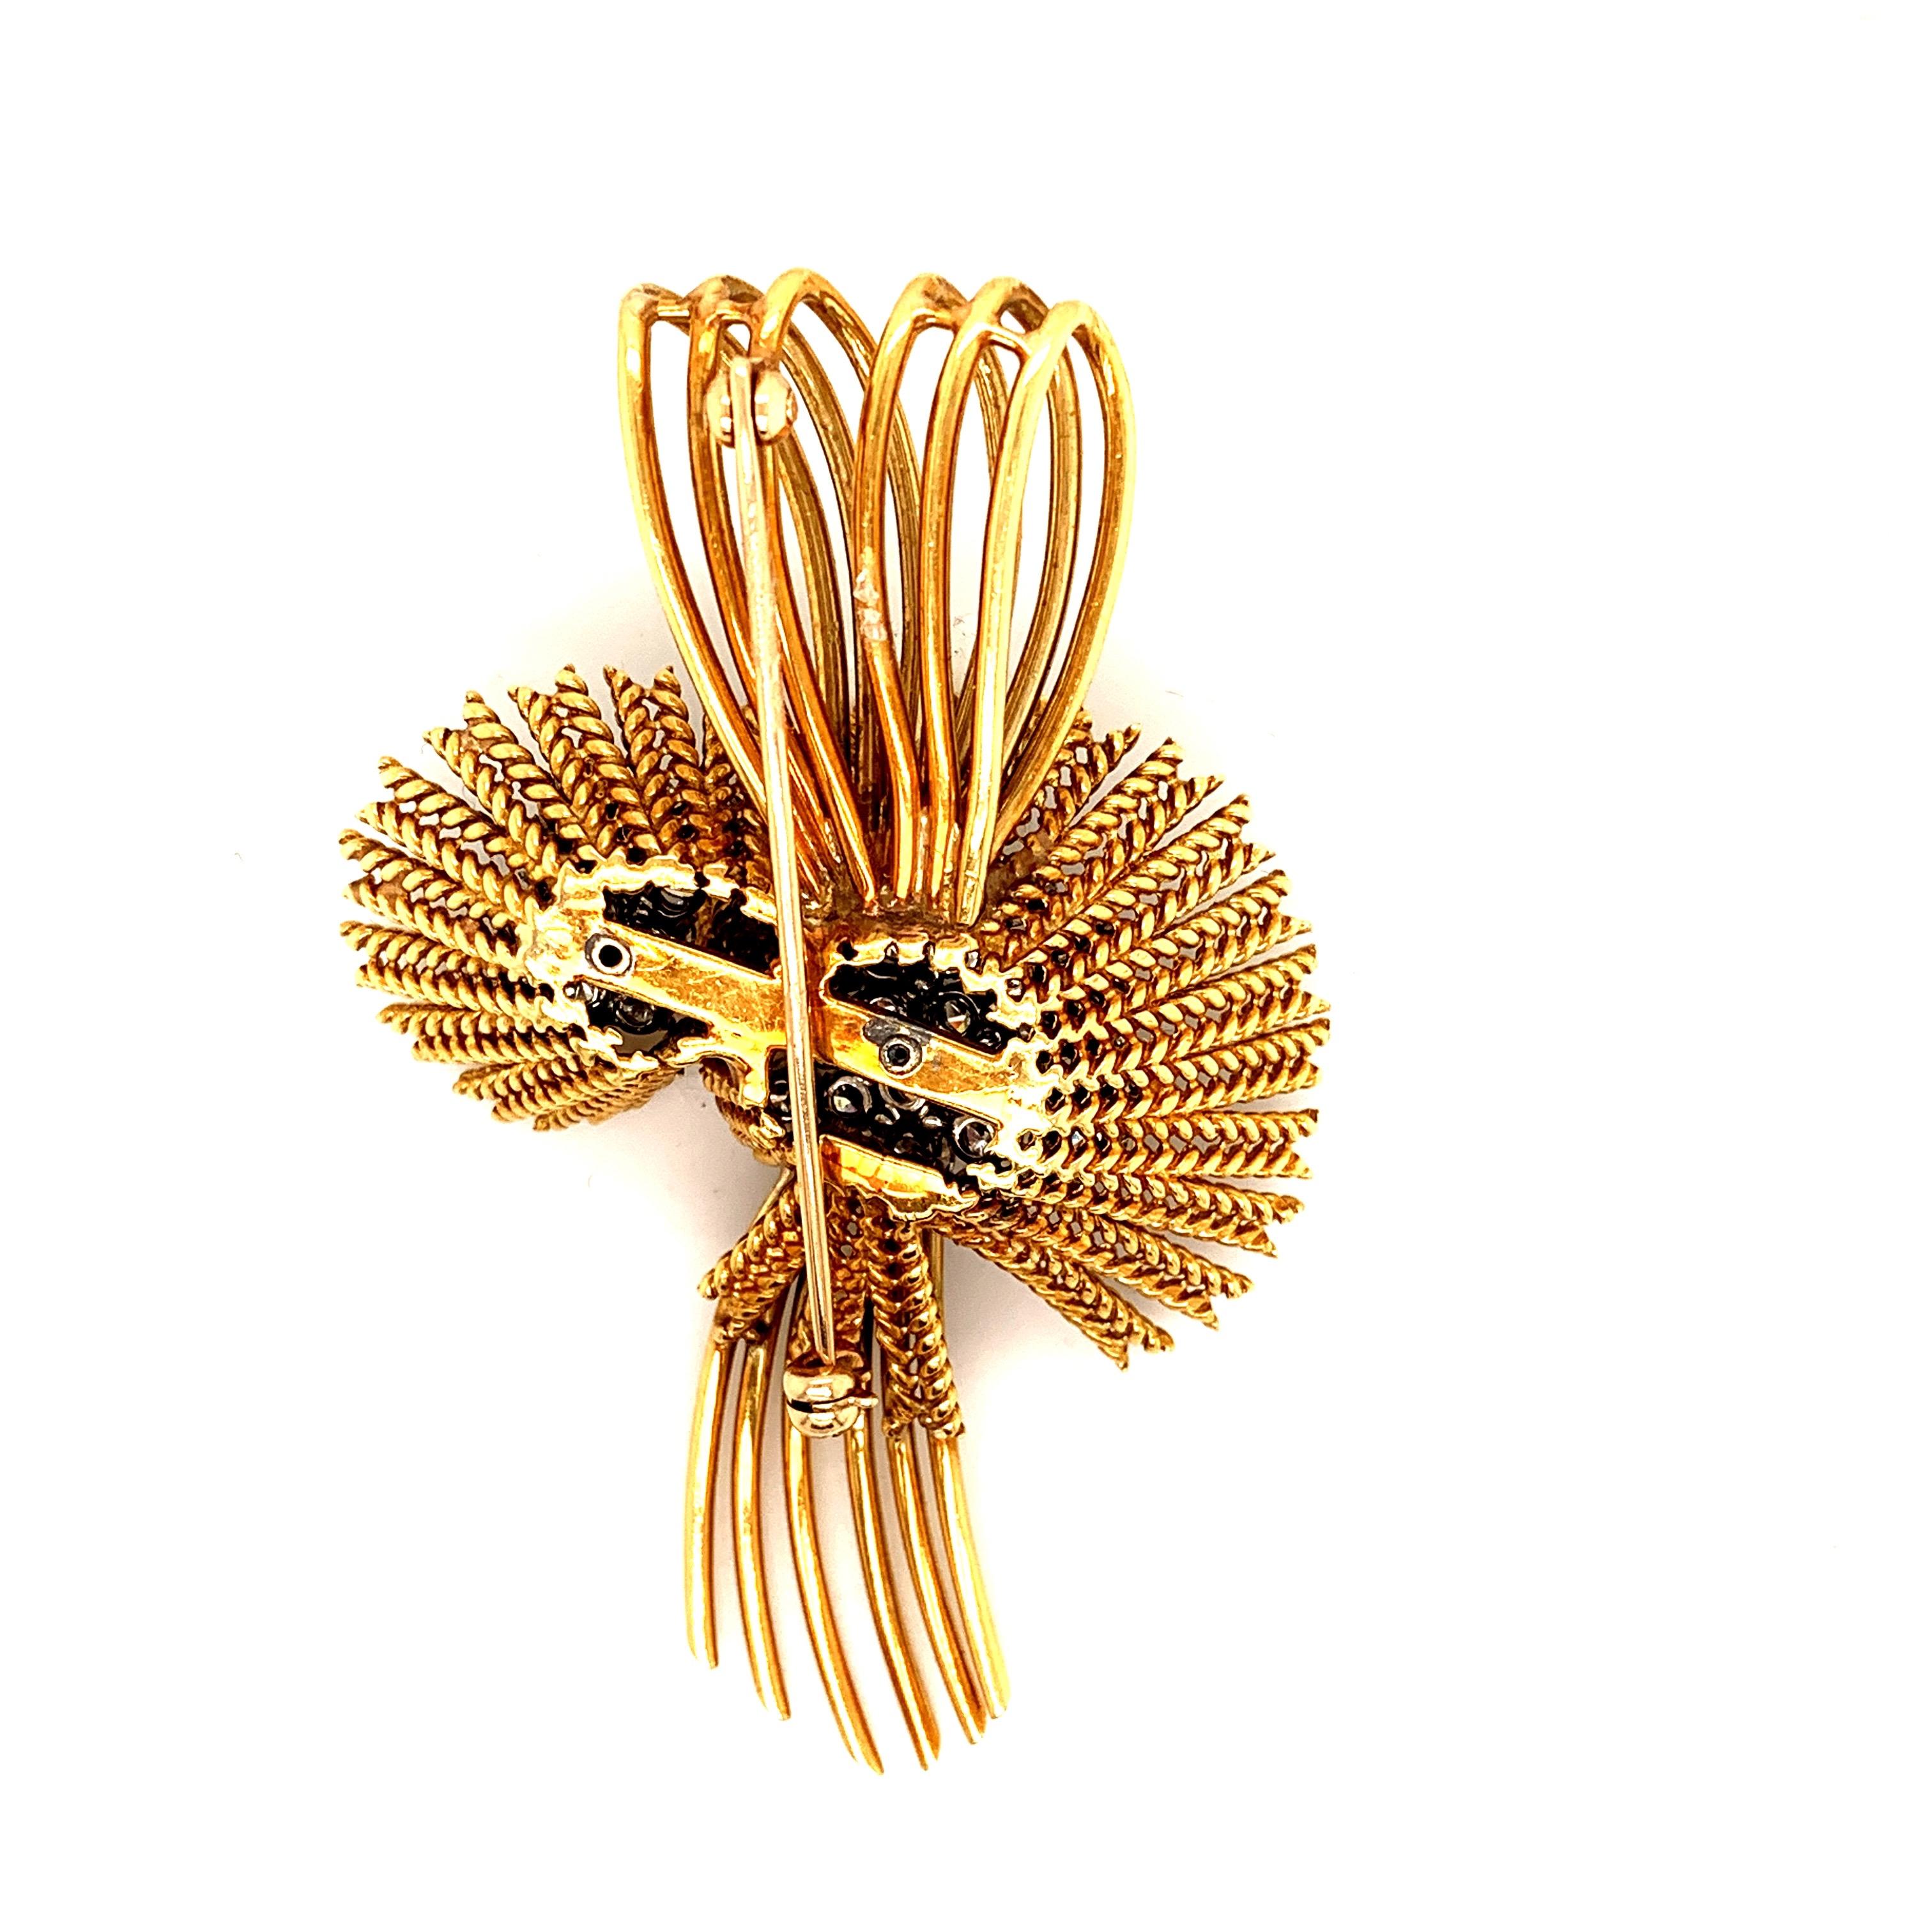 Stunning flower brooch pin, in 18k Gold set with approx. 5 carats of beautiful near colorless Diamonds.
This retro pin weighing over 35 grams of Gold captures the glamour of the 1950’s.

Viewings available in our NYC wholesale office by